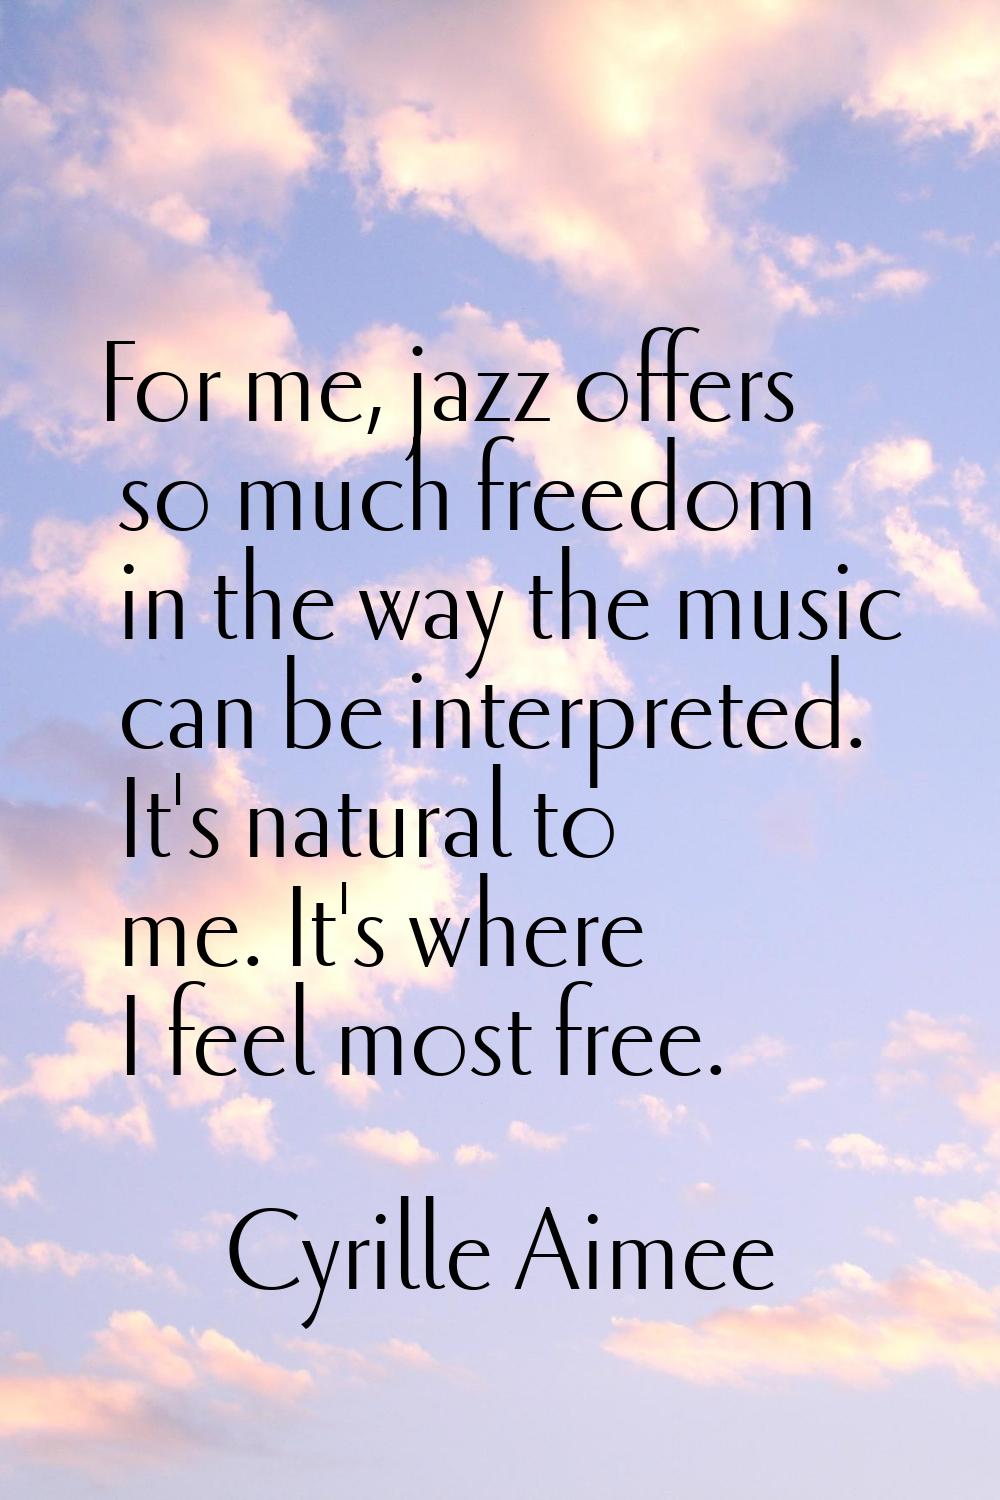 For me, jazz offers so much freedom in the way the music can be interpreted. It's natural to me. It